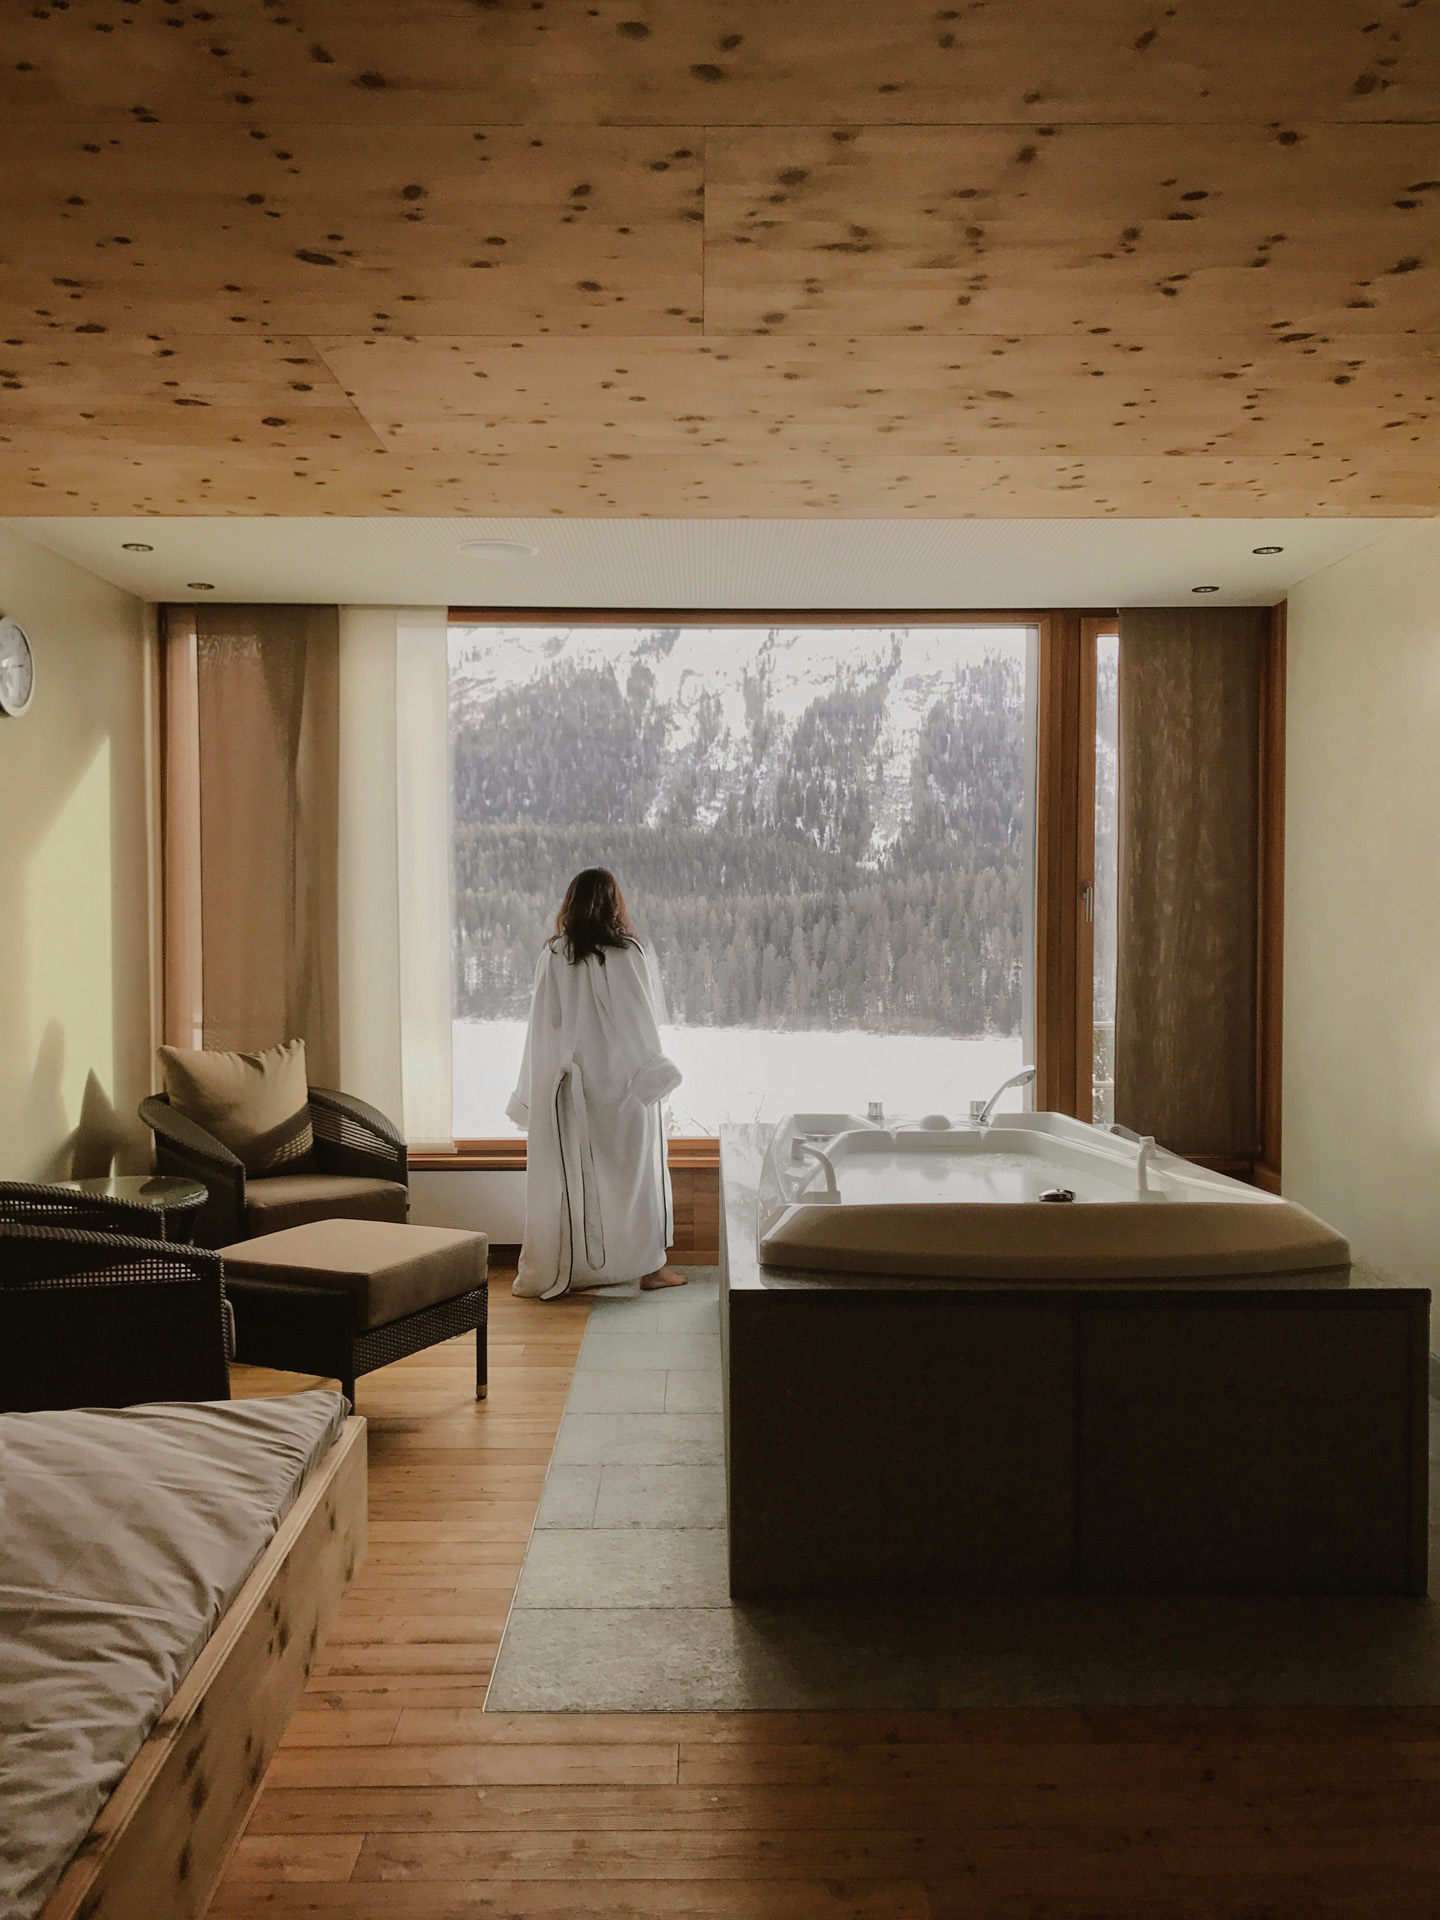 Swiss Deluxe Hotels Stories Winter 2020 The Call Of The Mountains 10 Photo Jan 12, 8 43 13 AM Ecirgb